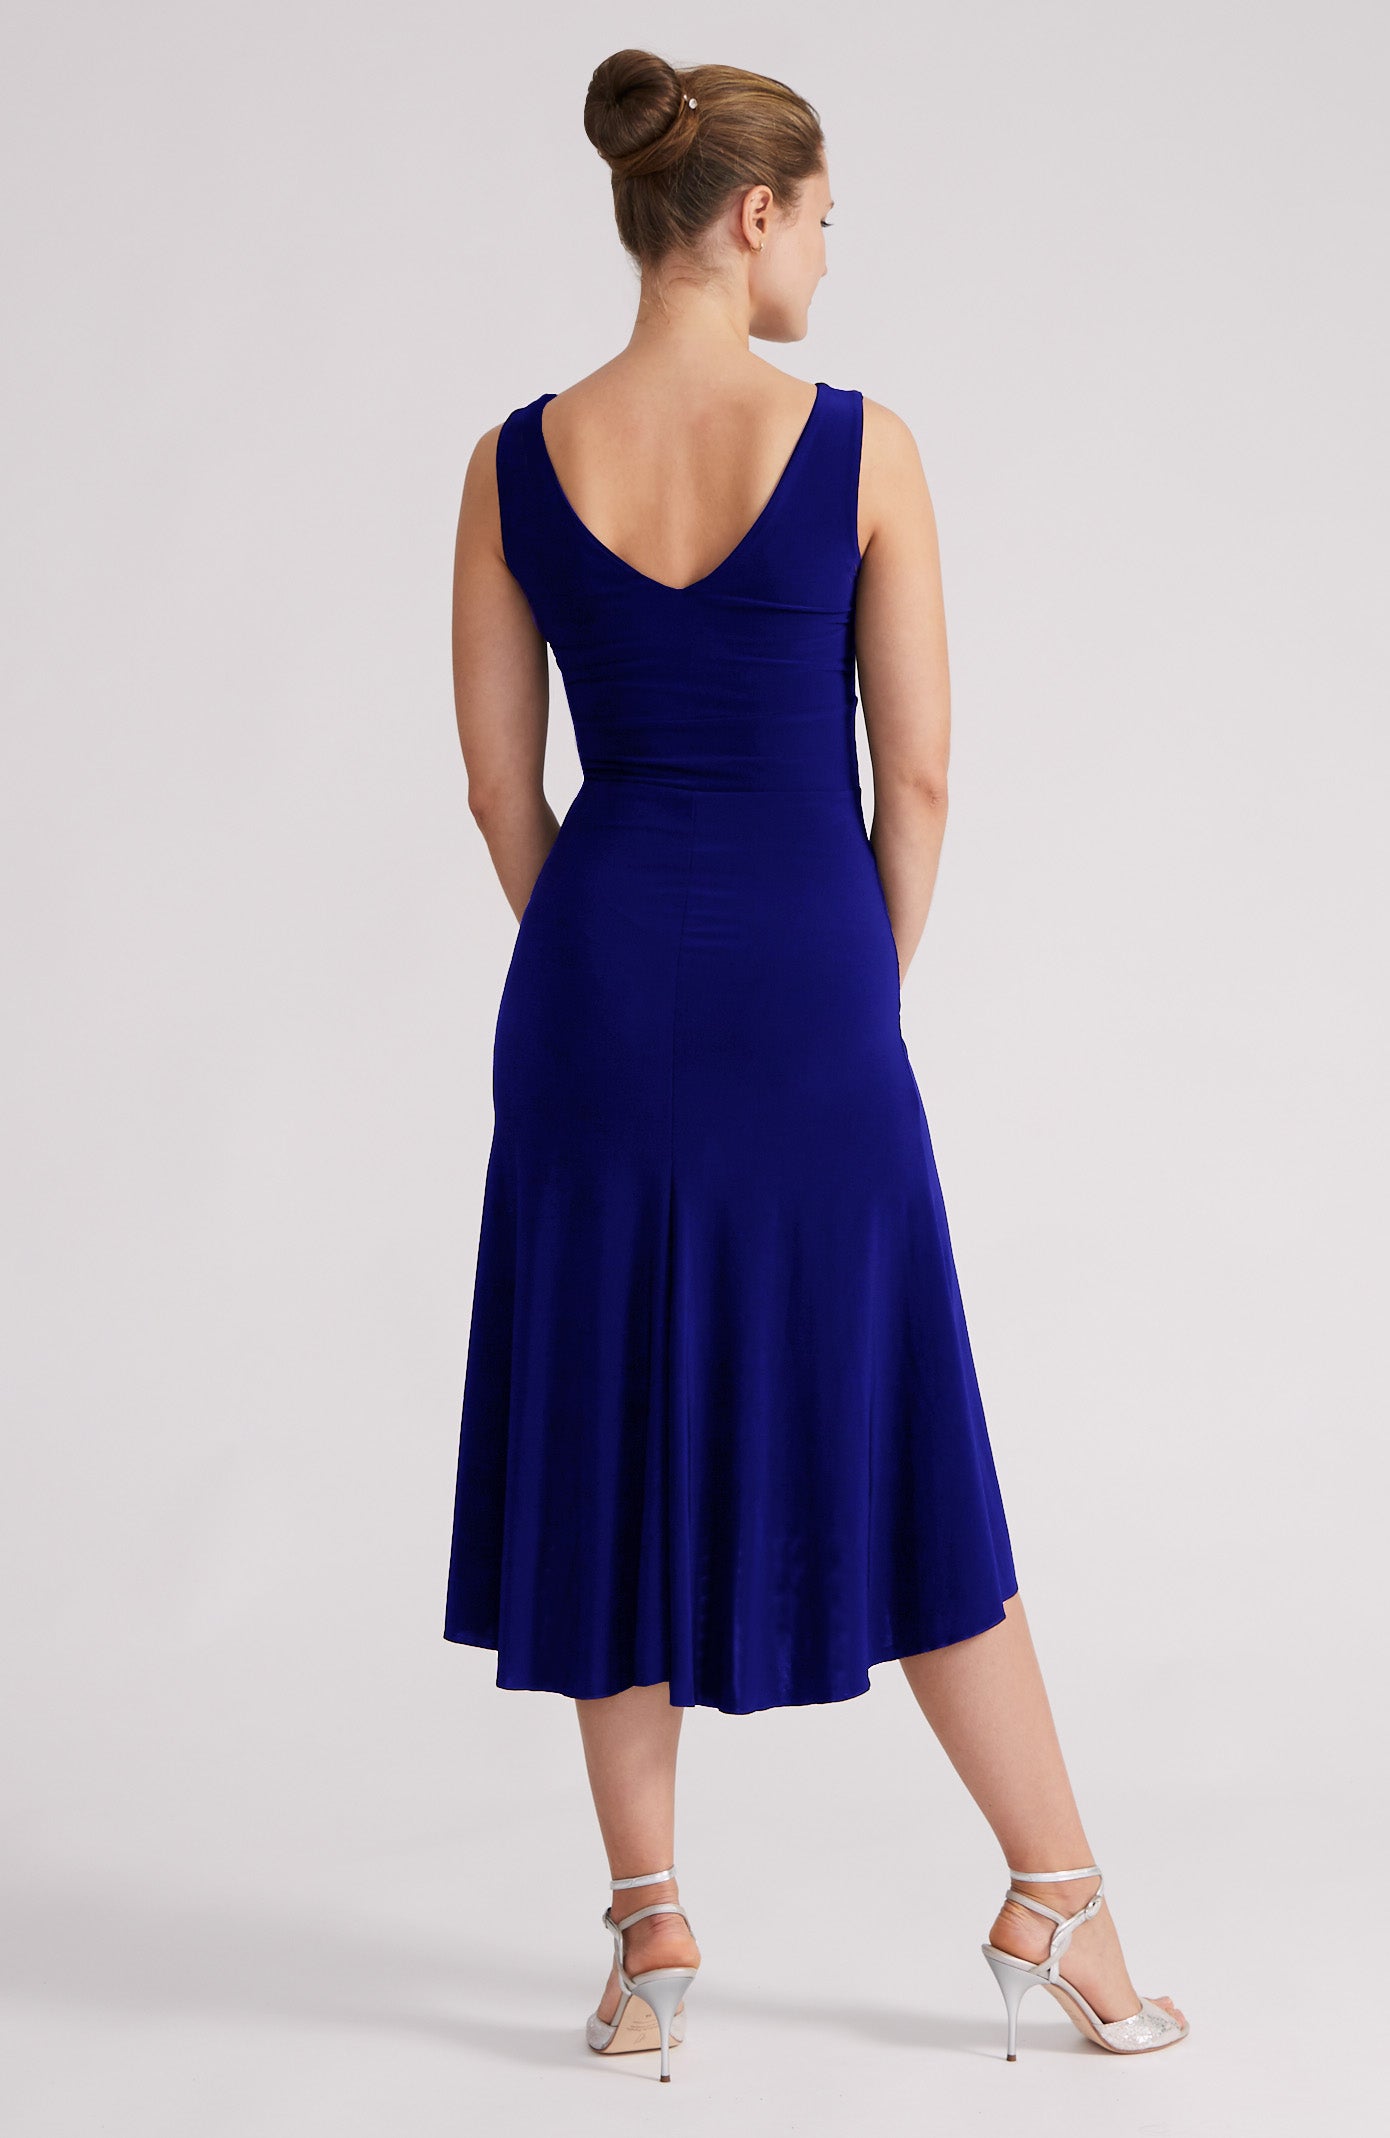 argentine tango dress in royal blue by Coleccion Berlin